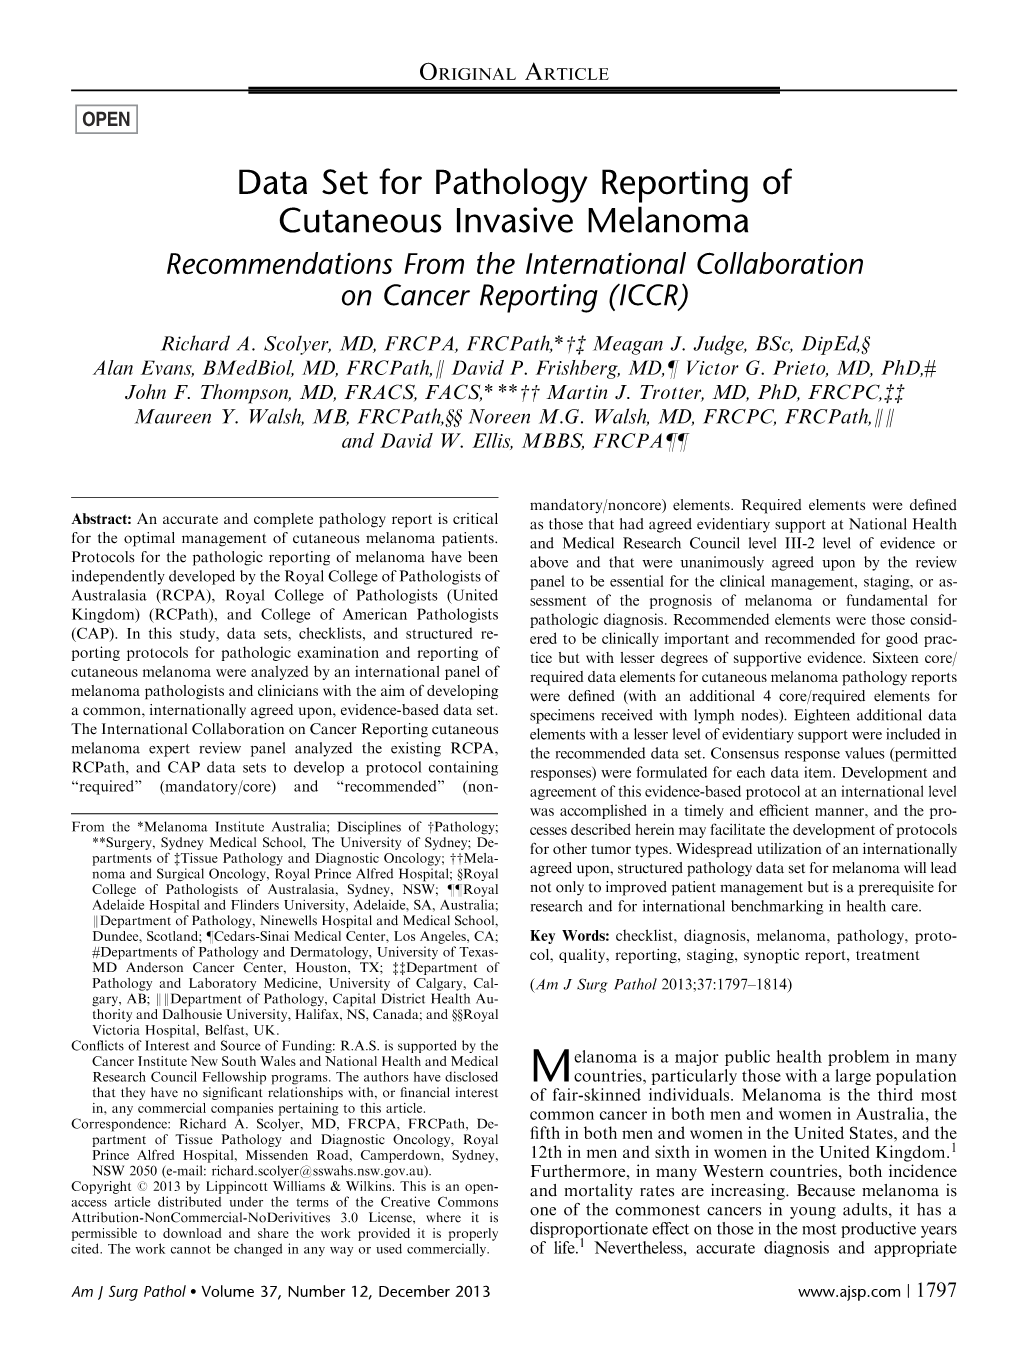 Data Set for Pathology Reporting of Cutaneous Invasive Melanoma Recommendations from the International Collaboration on Cancer Reporting (ICCR)